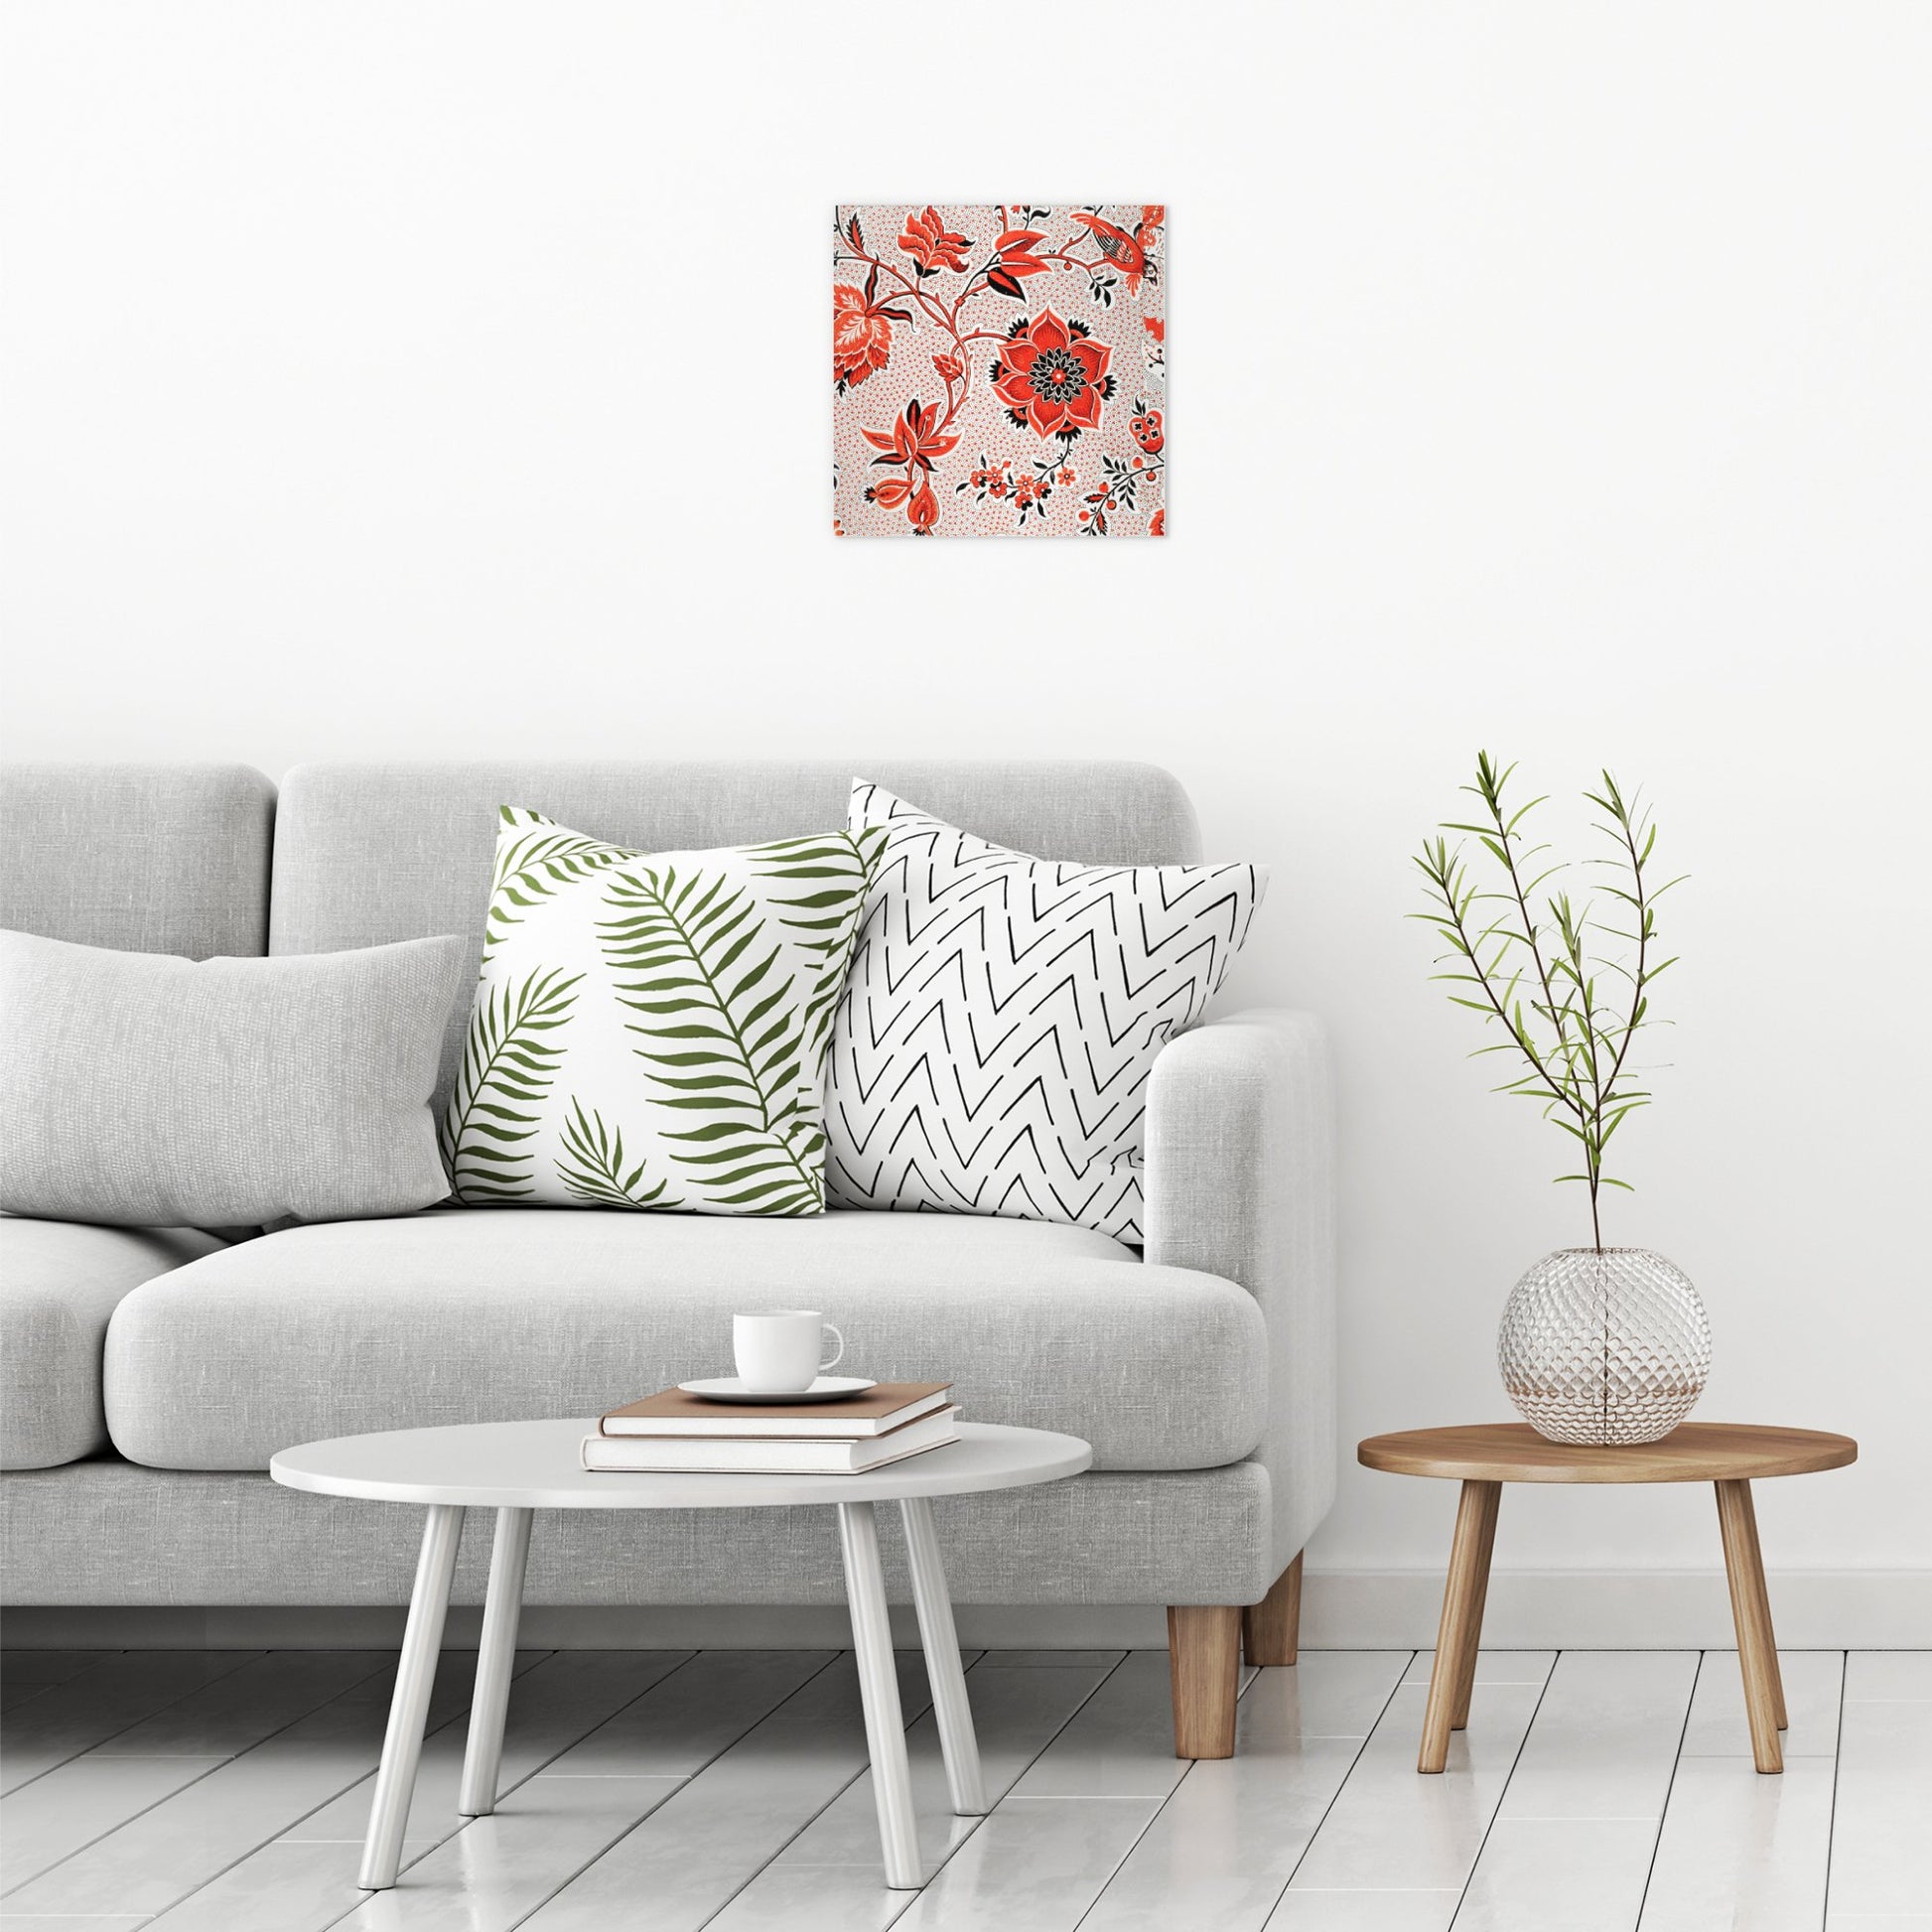 A contemporary modern room view showing a medium size metal art poster display plate with printed design of a Vintage Red Floral Wallpaper Pattern